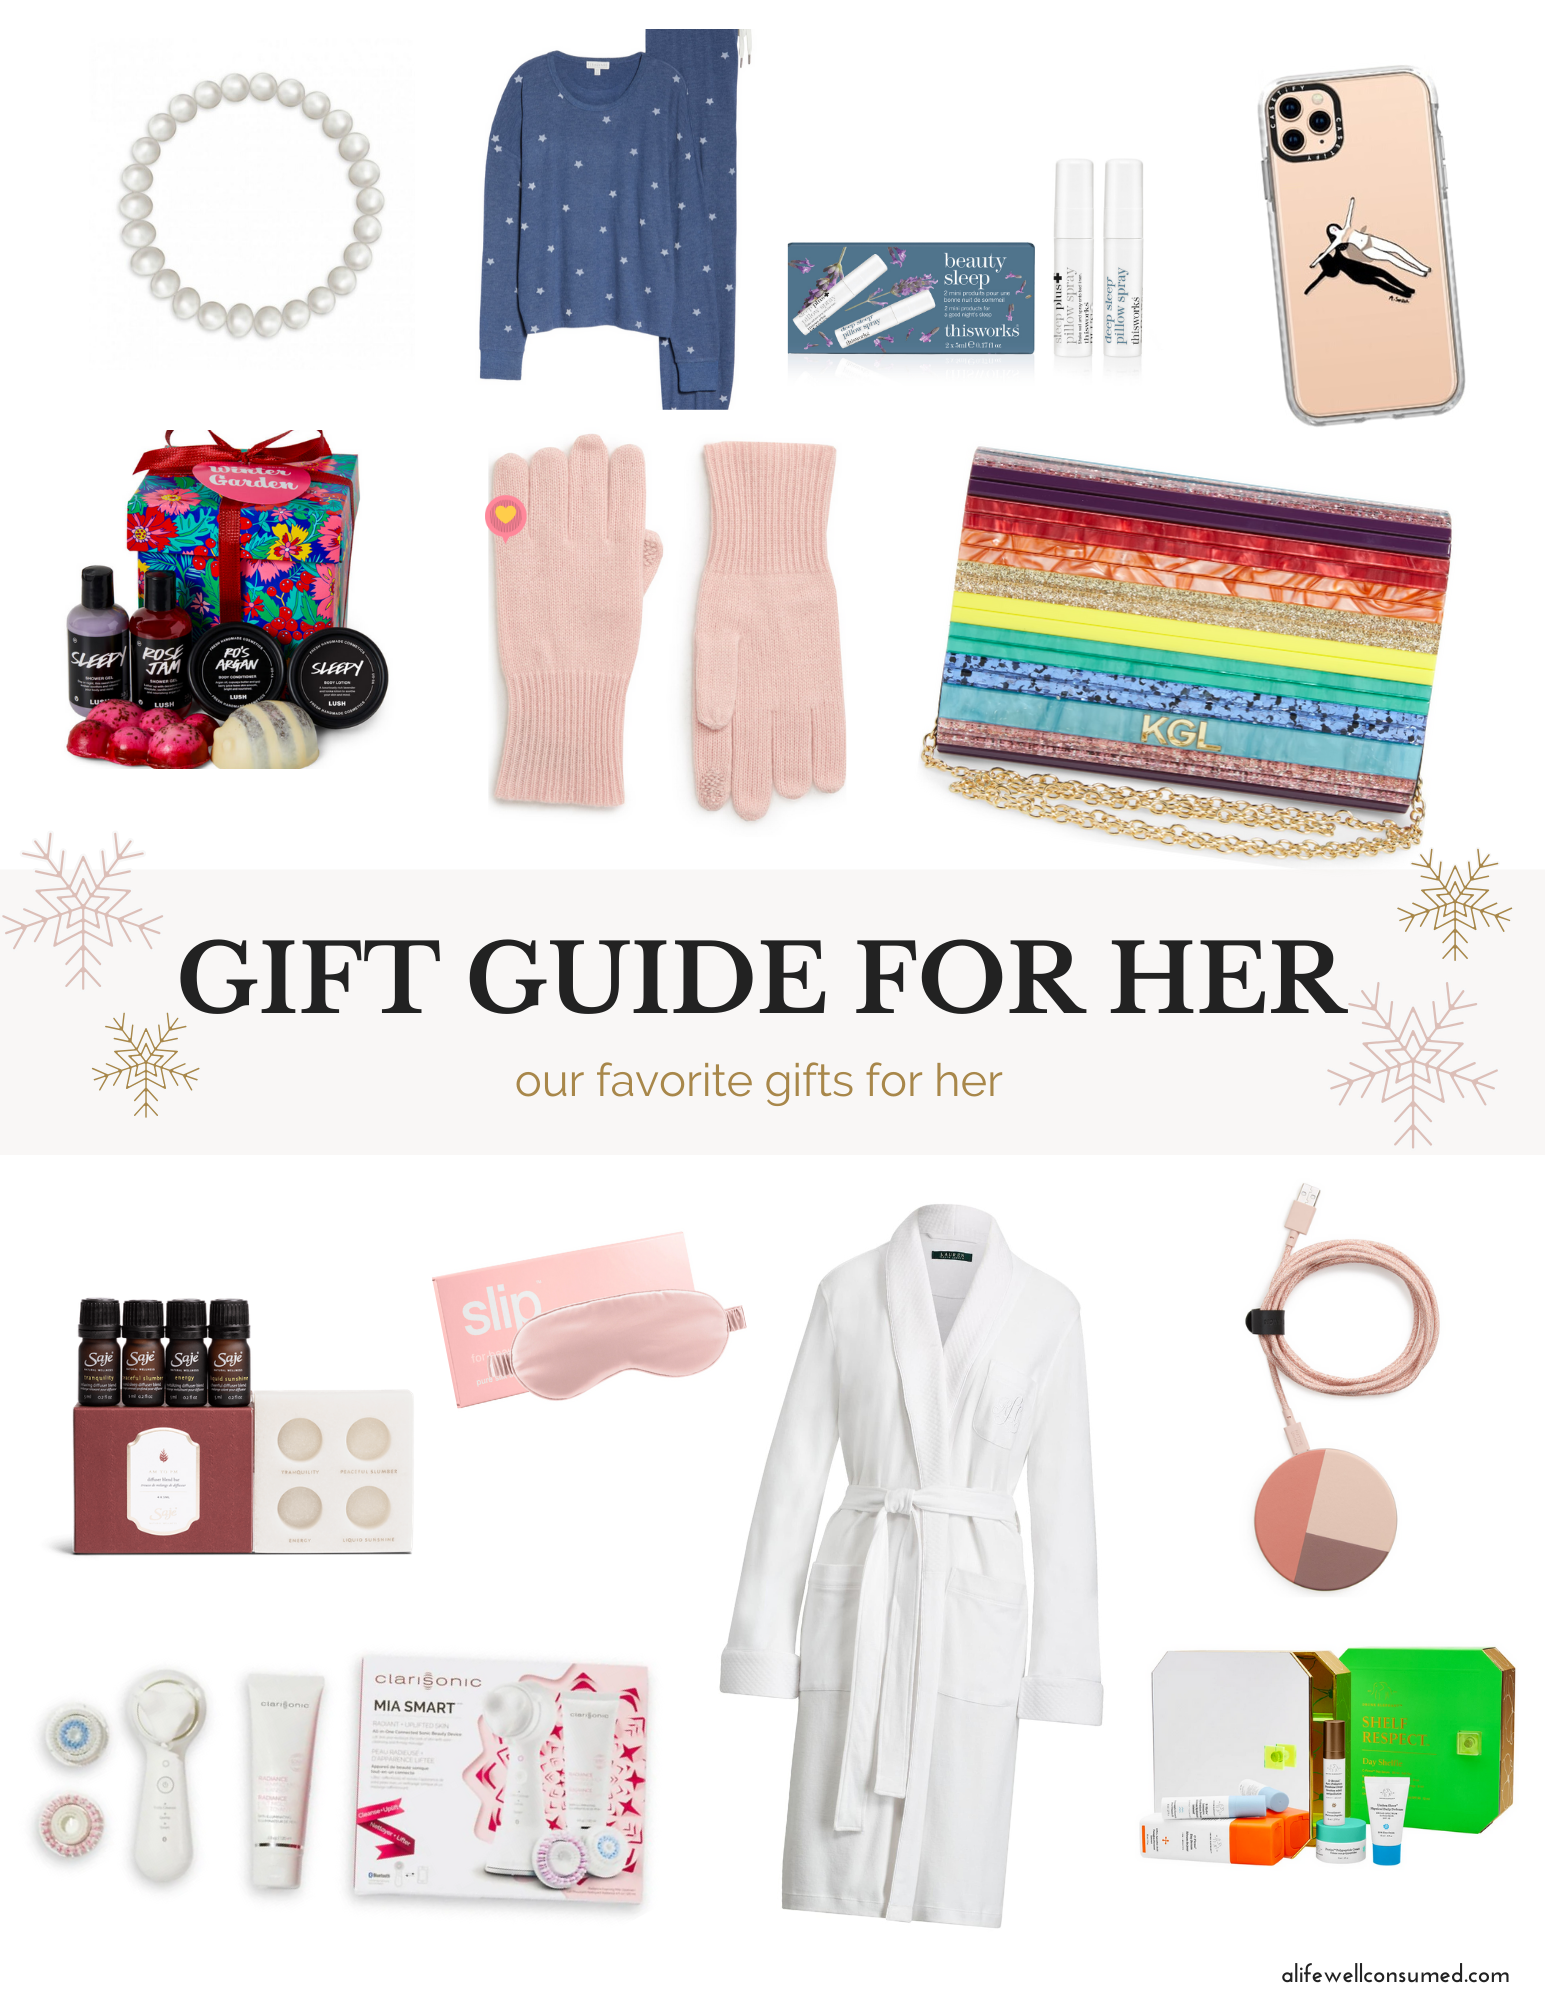 Holiday Gift Guide for Her  Your Best Friend, Mom or Sister!